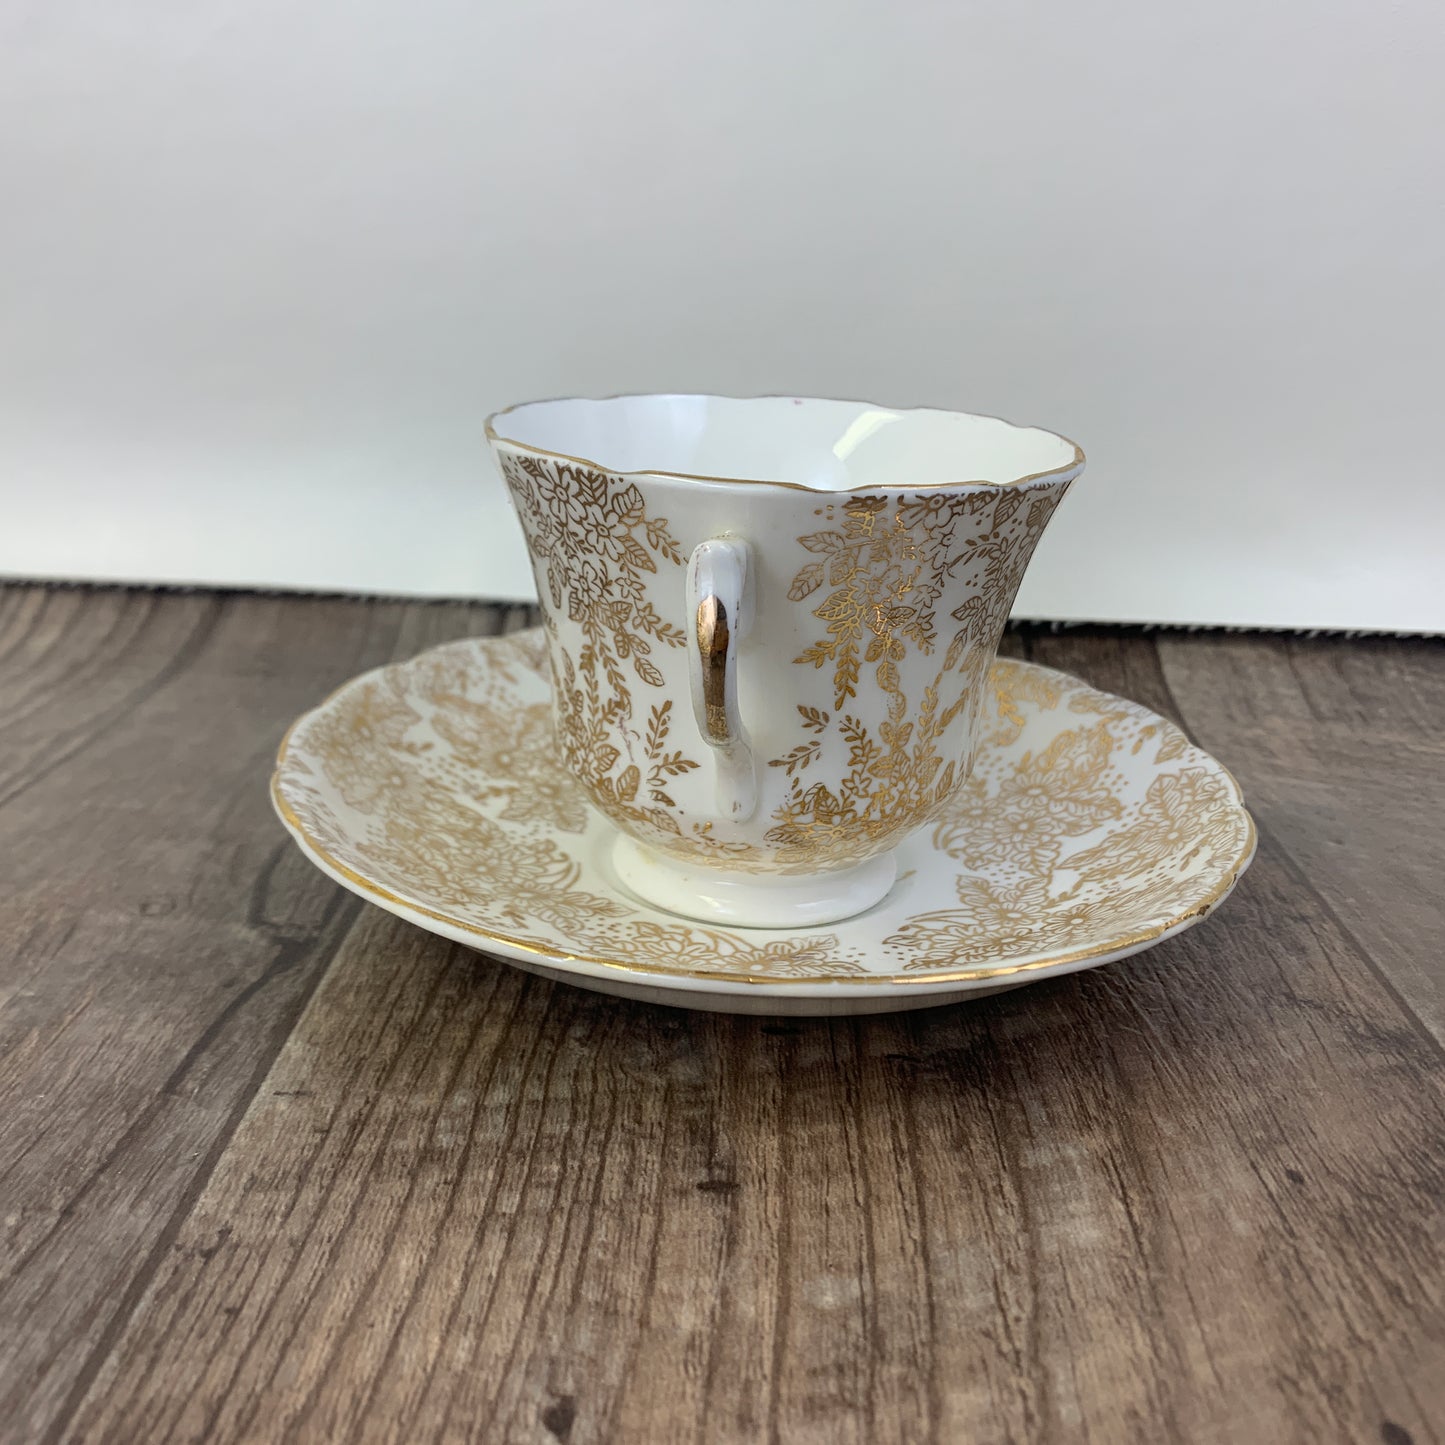 White and Gold Floral Teacup Royal Vale Vintage Tea Cup and Saucer